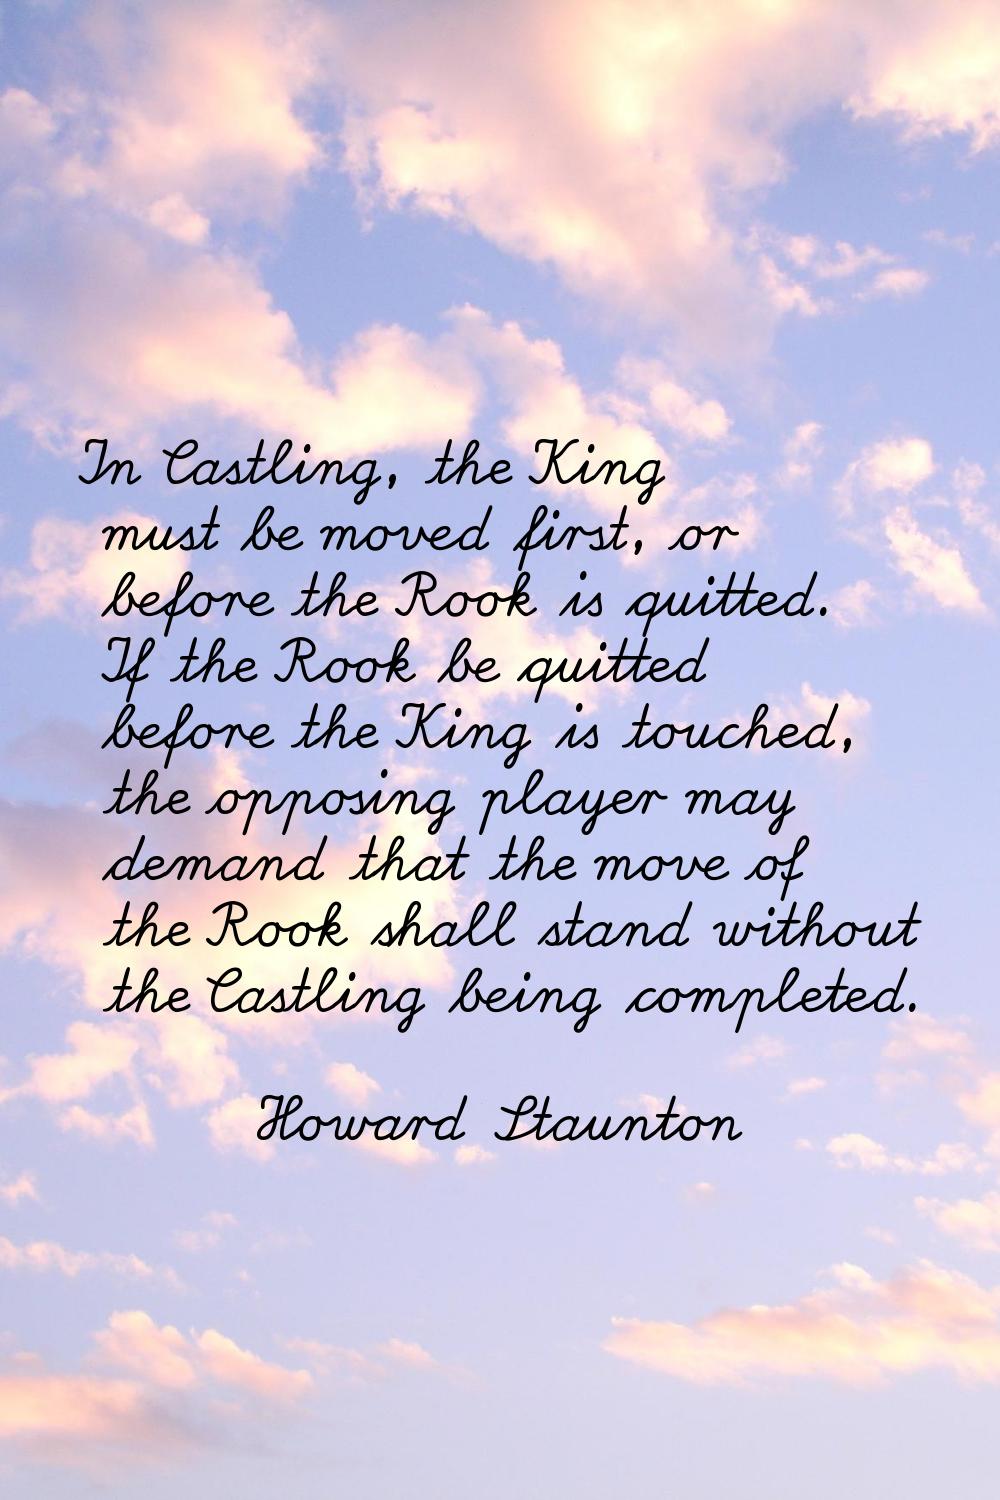 In Castling, the King must be moved first, or before the Rook is quitted. If the Rook be quitted be